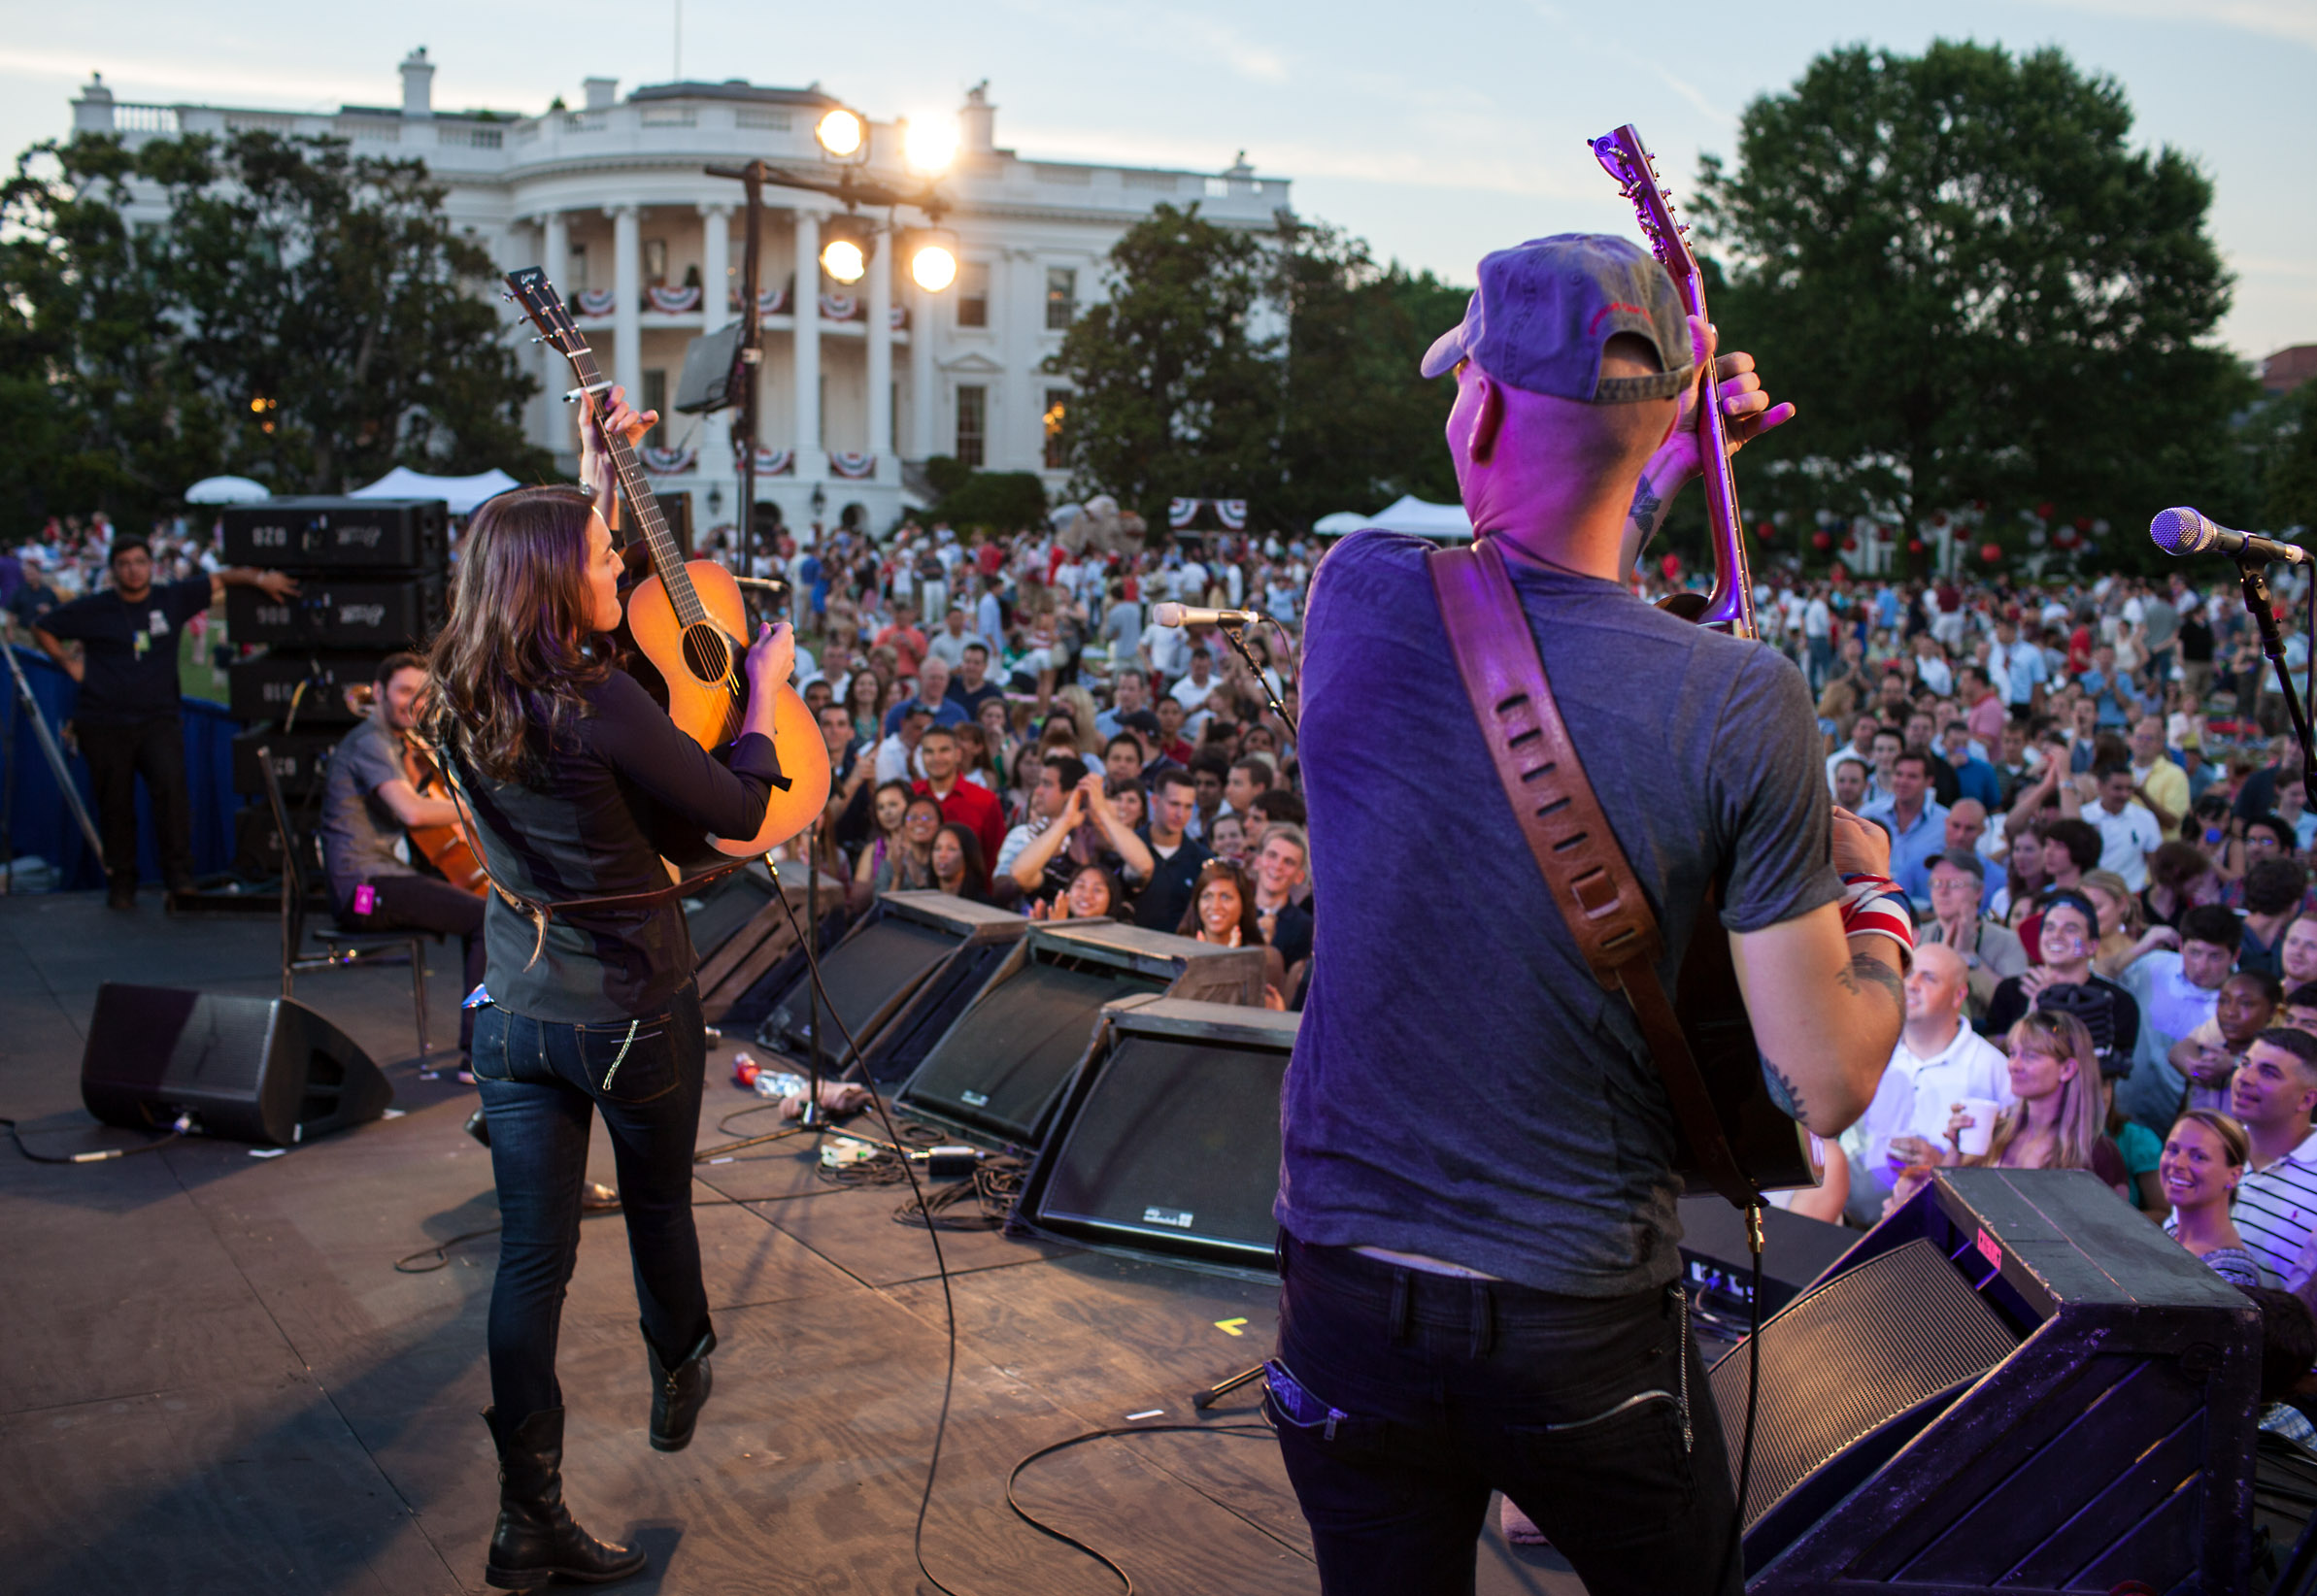 President Barack Obama and First Lady Michelle Obama host a Fourth of July celebration with military personnel and their families on the South Lawn of the White House, July 4, 2010. "Salute to the Military" USO Concert  performance by Brandi Carlile. (Official White House Photo by Pete Souza)